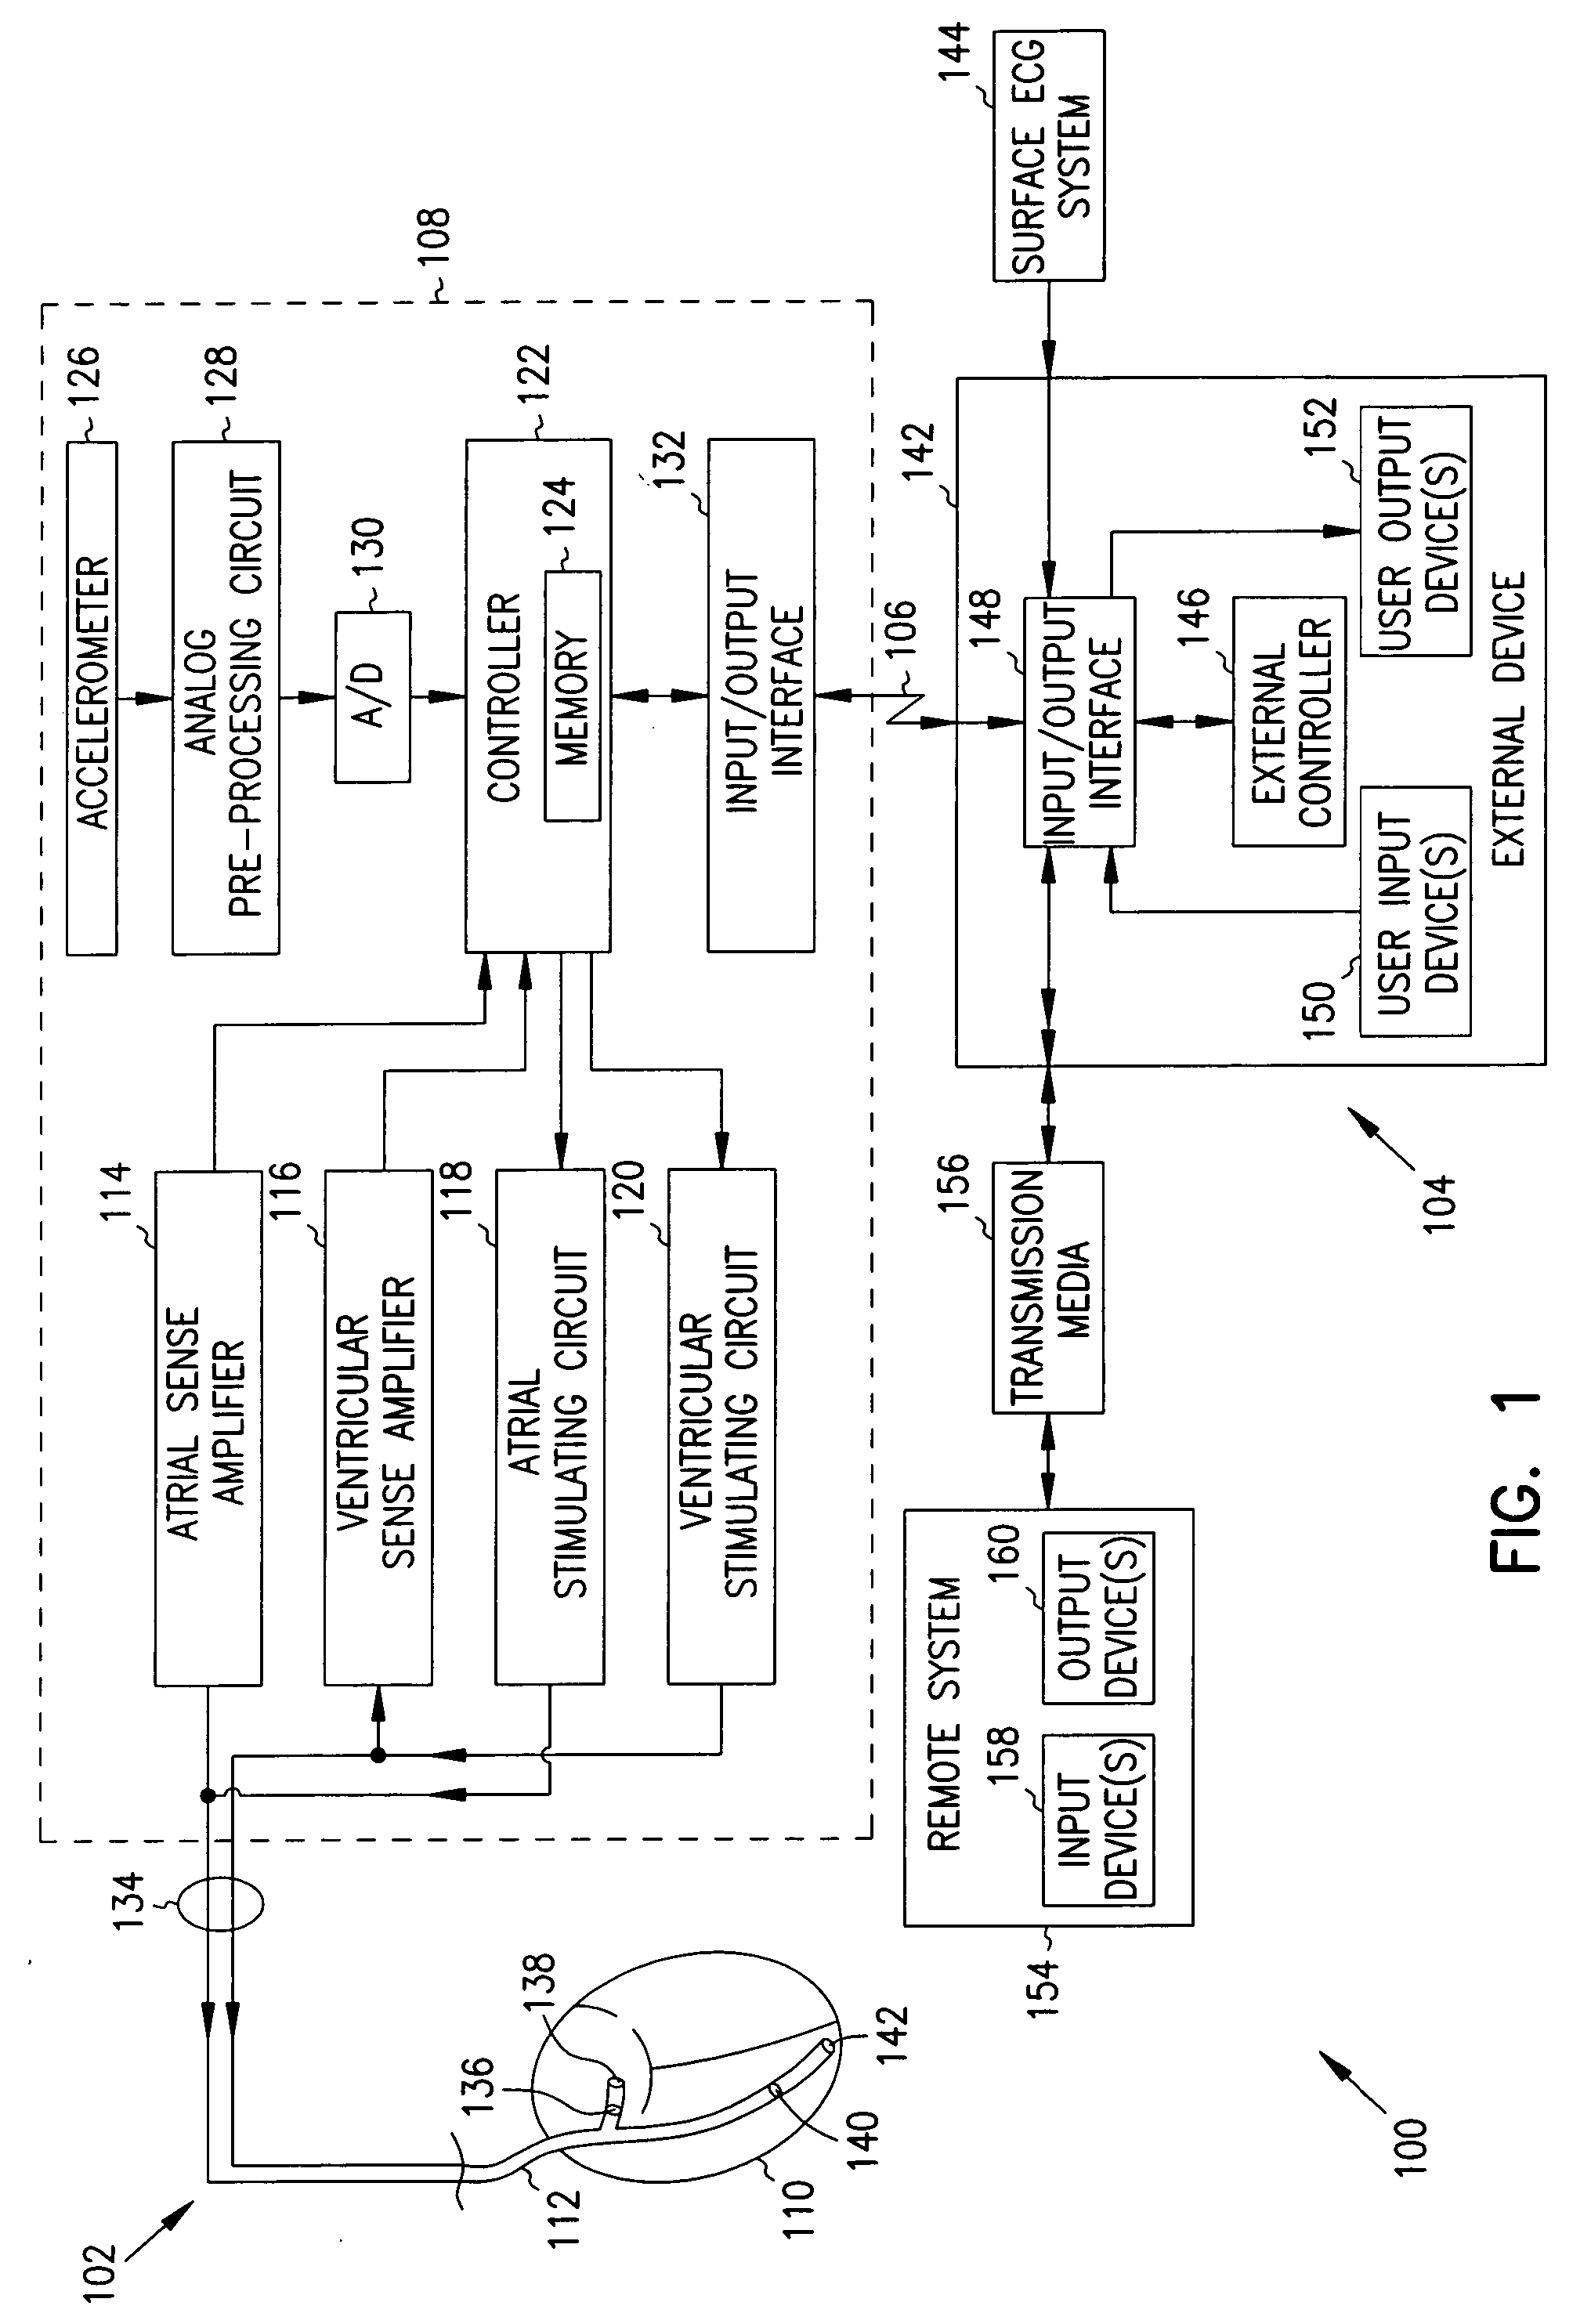 Apparatus and method for outputting heart sounds